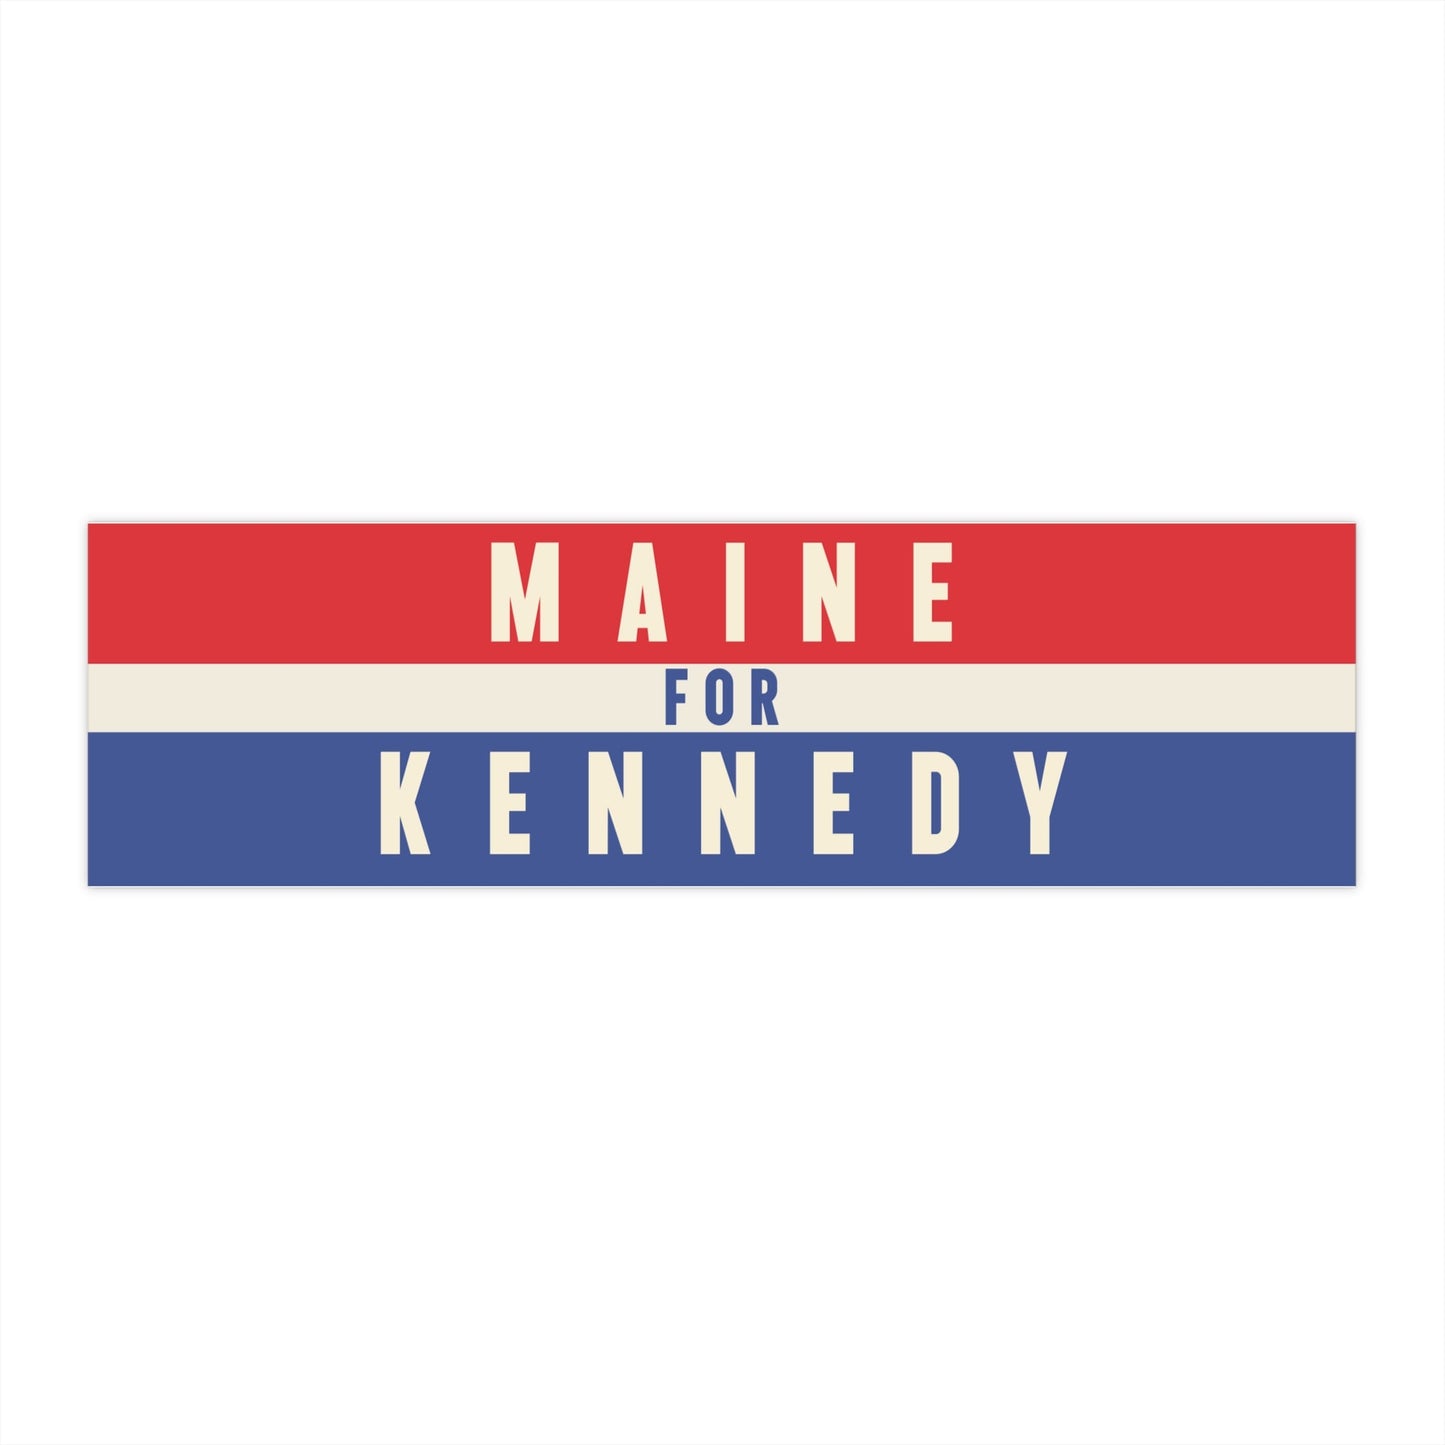 Maine for Kennedy Bumper Sticker - TEAM KENNEDY. All rights reserved